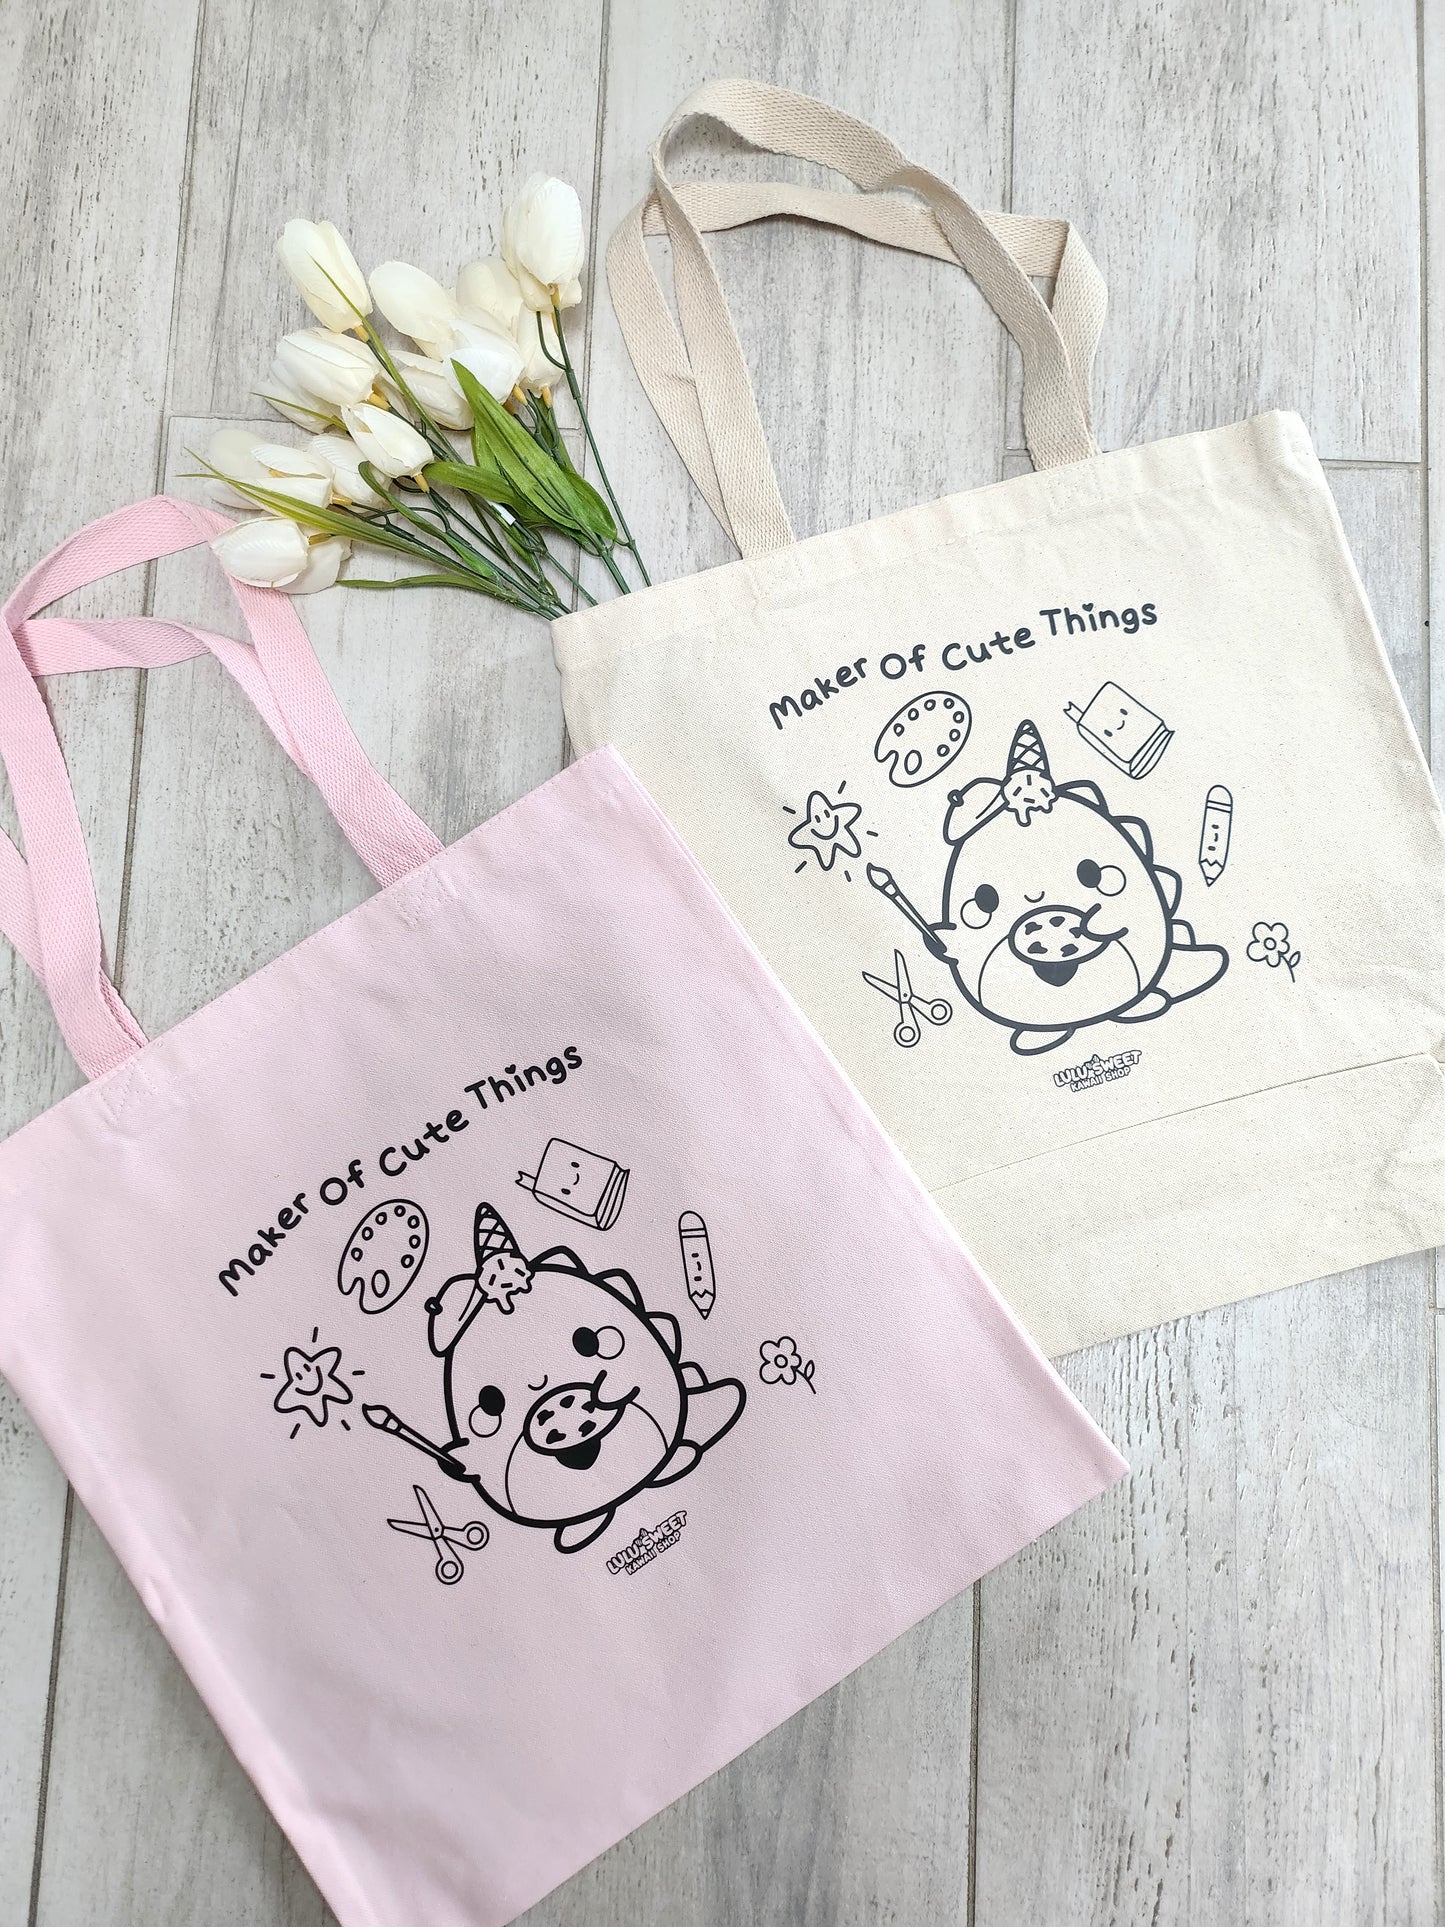 Maker of Cute Things Canvas Tote Bag